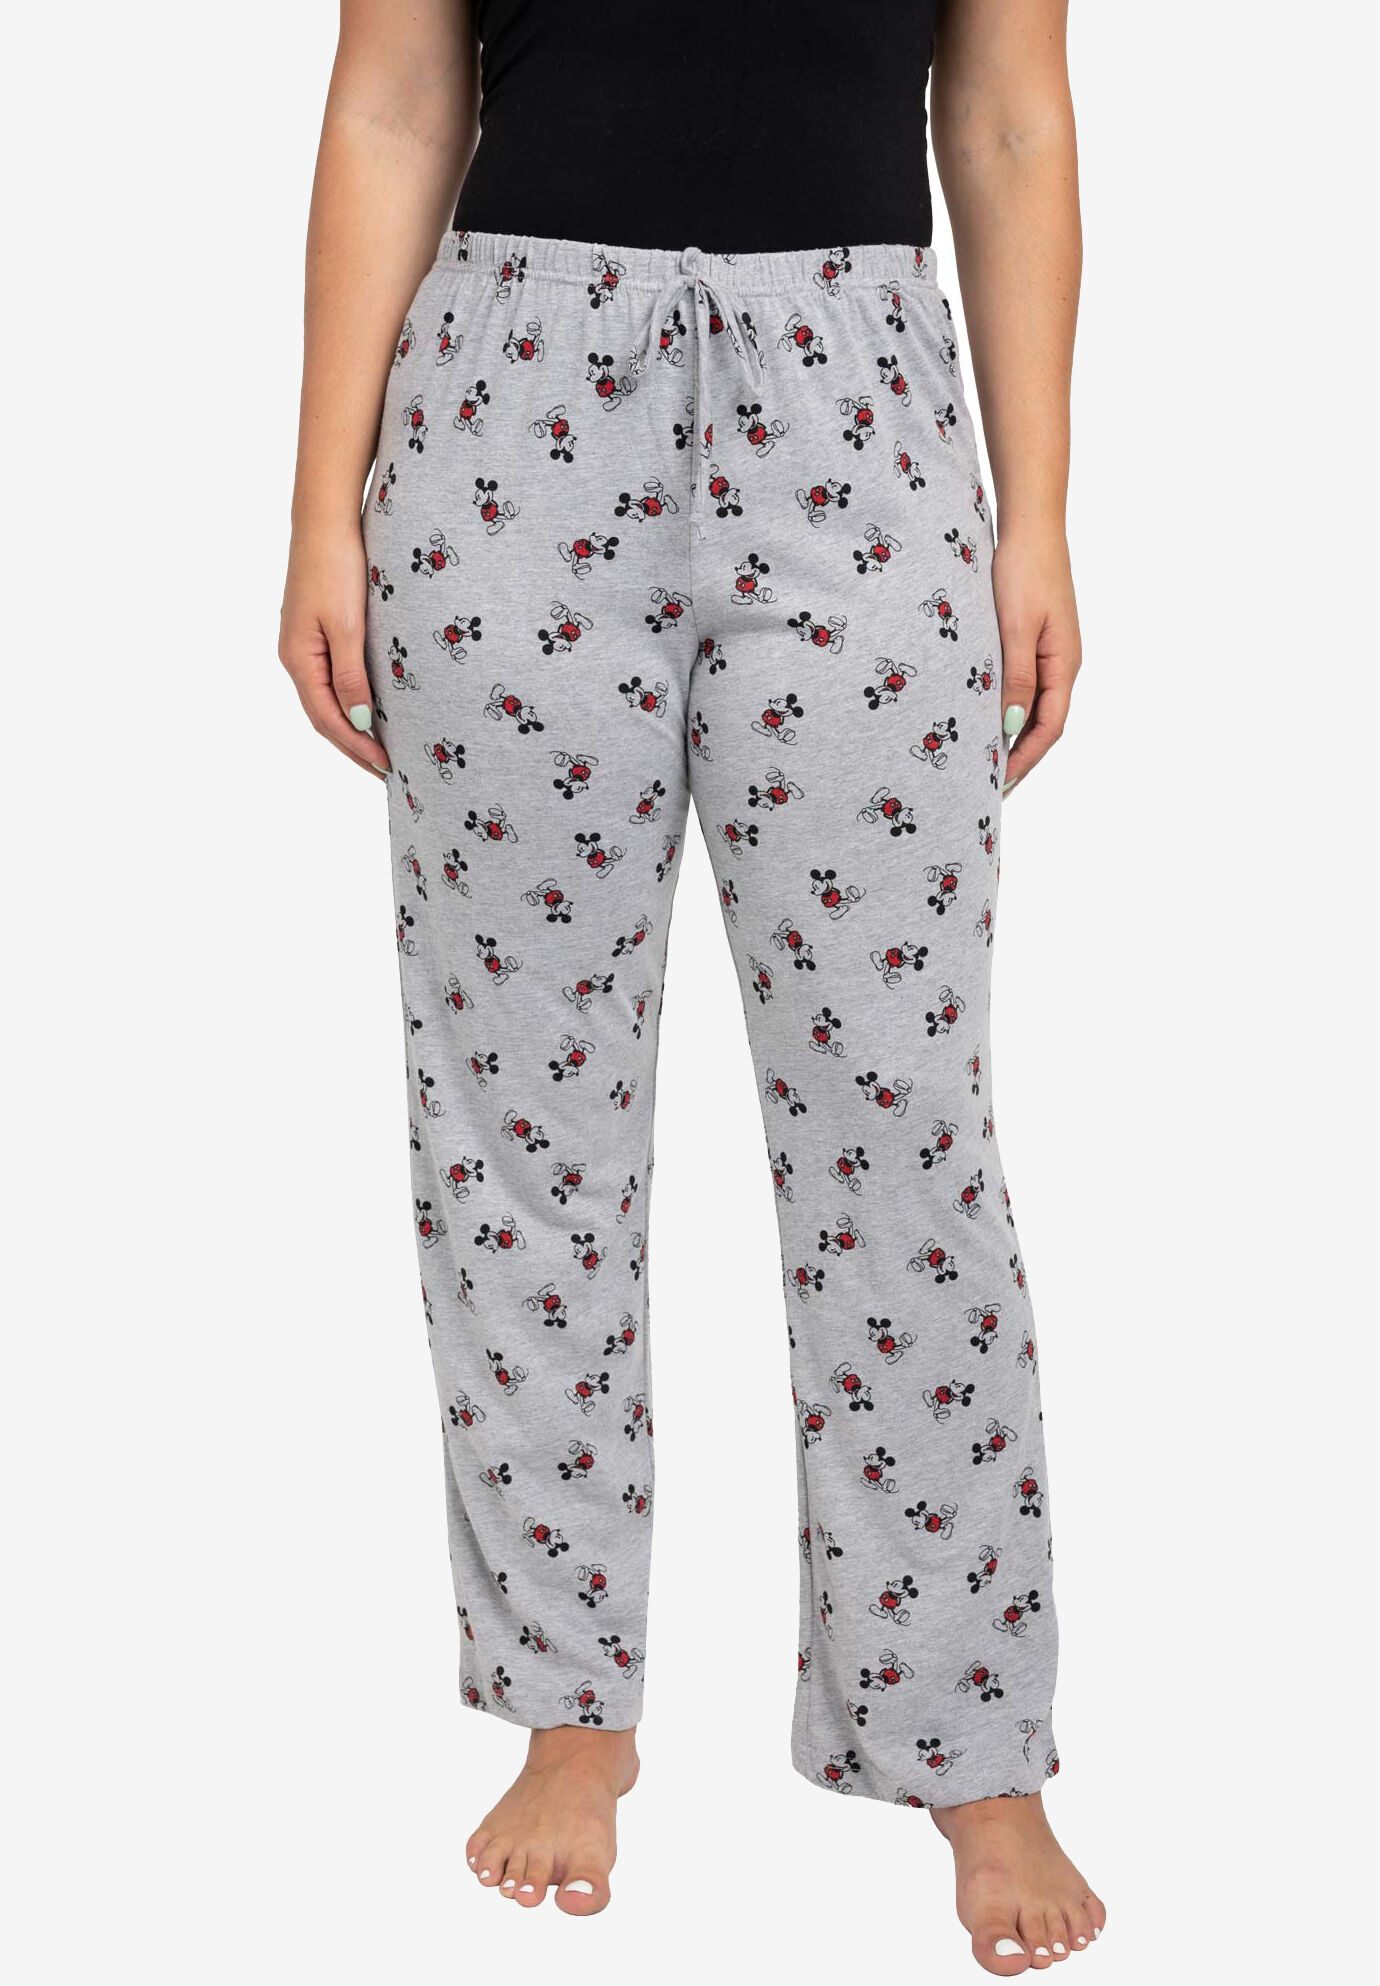 MICKEY MOUSE AND FRIENDS © DISNEY 100TH ANNIVERSARY PLUSH PANTS - Black |  ZARA United States